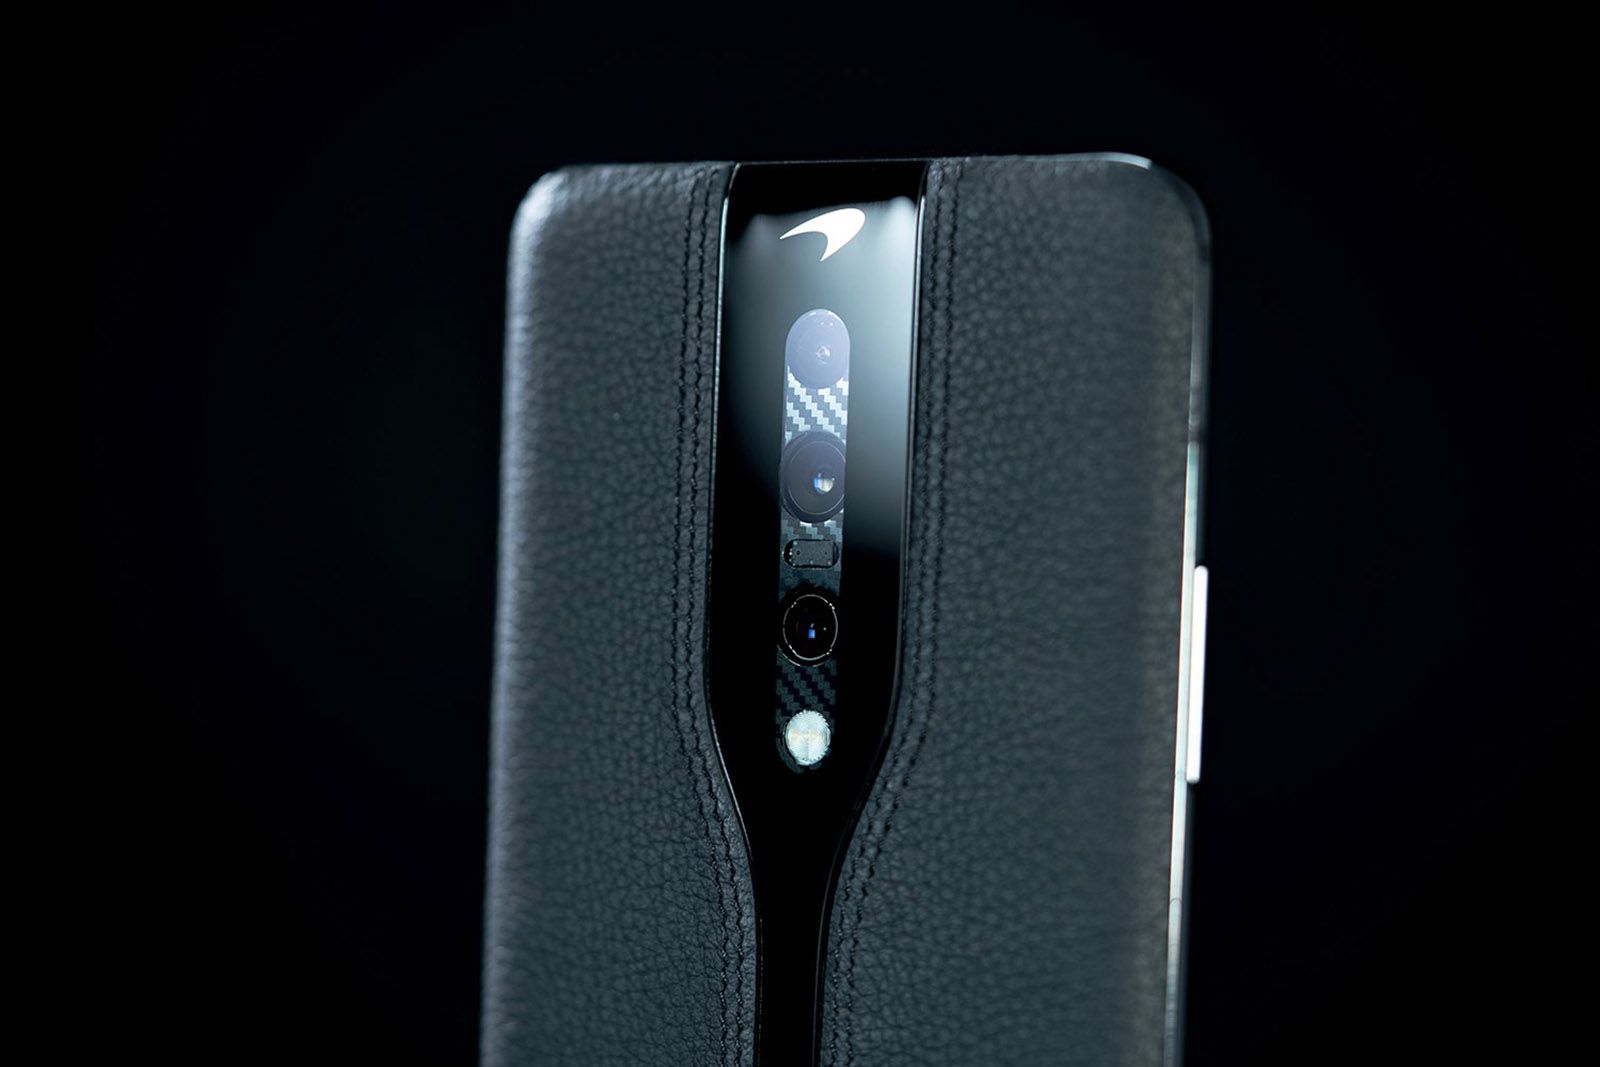 Black is the new orange for OnePlus Concept One image 1